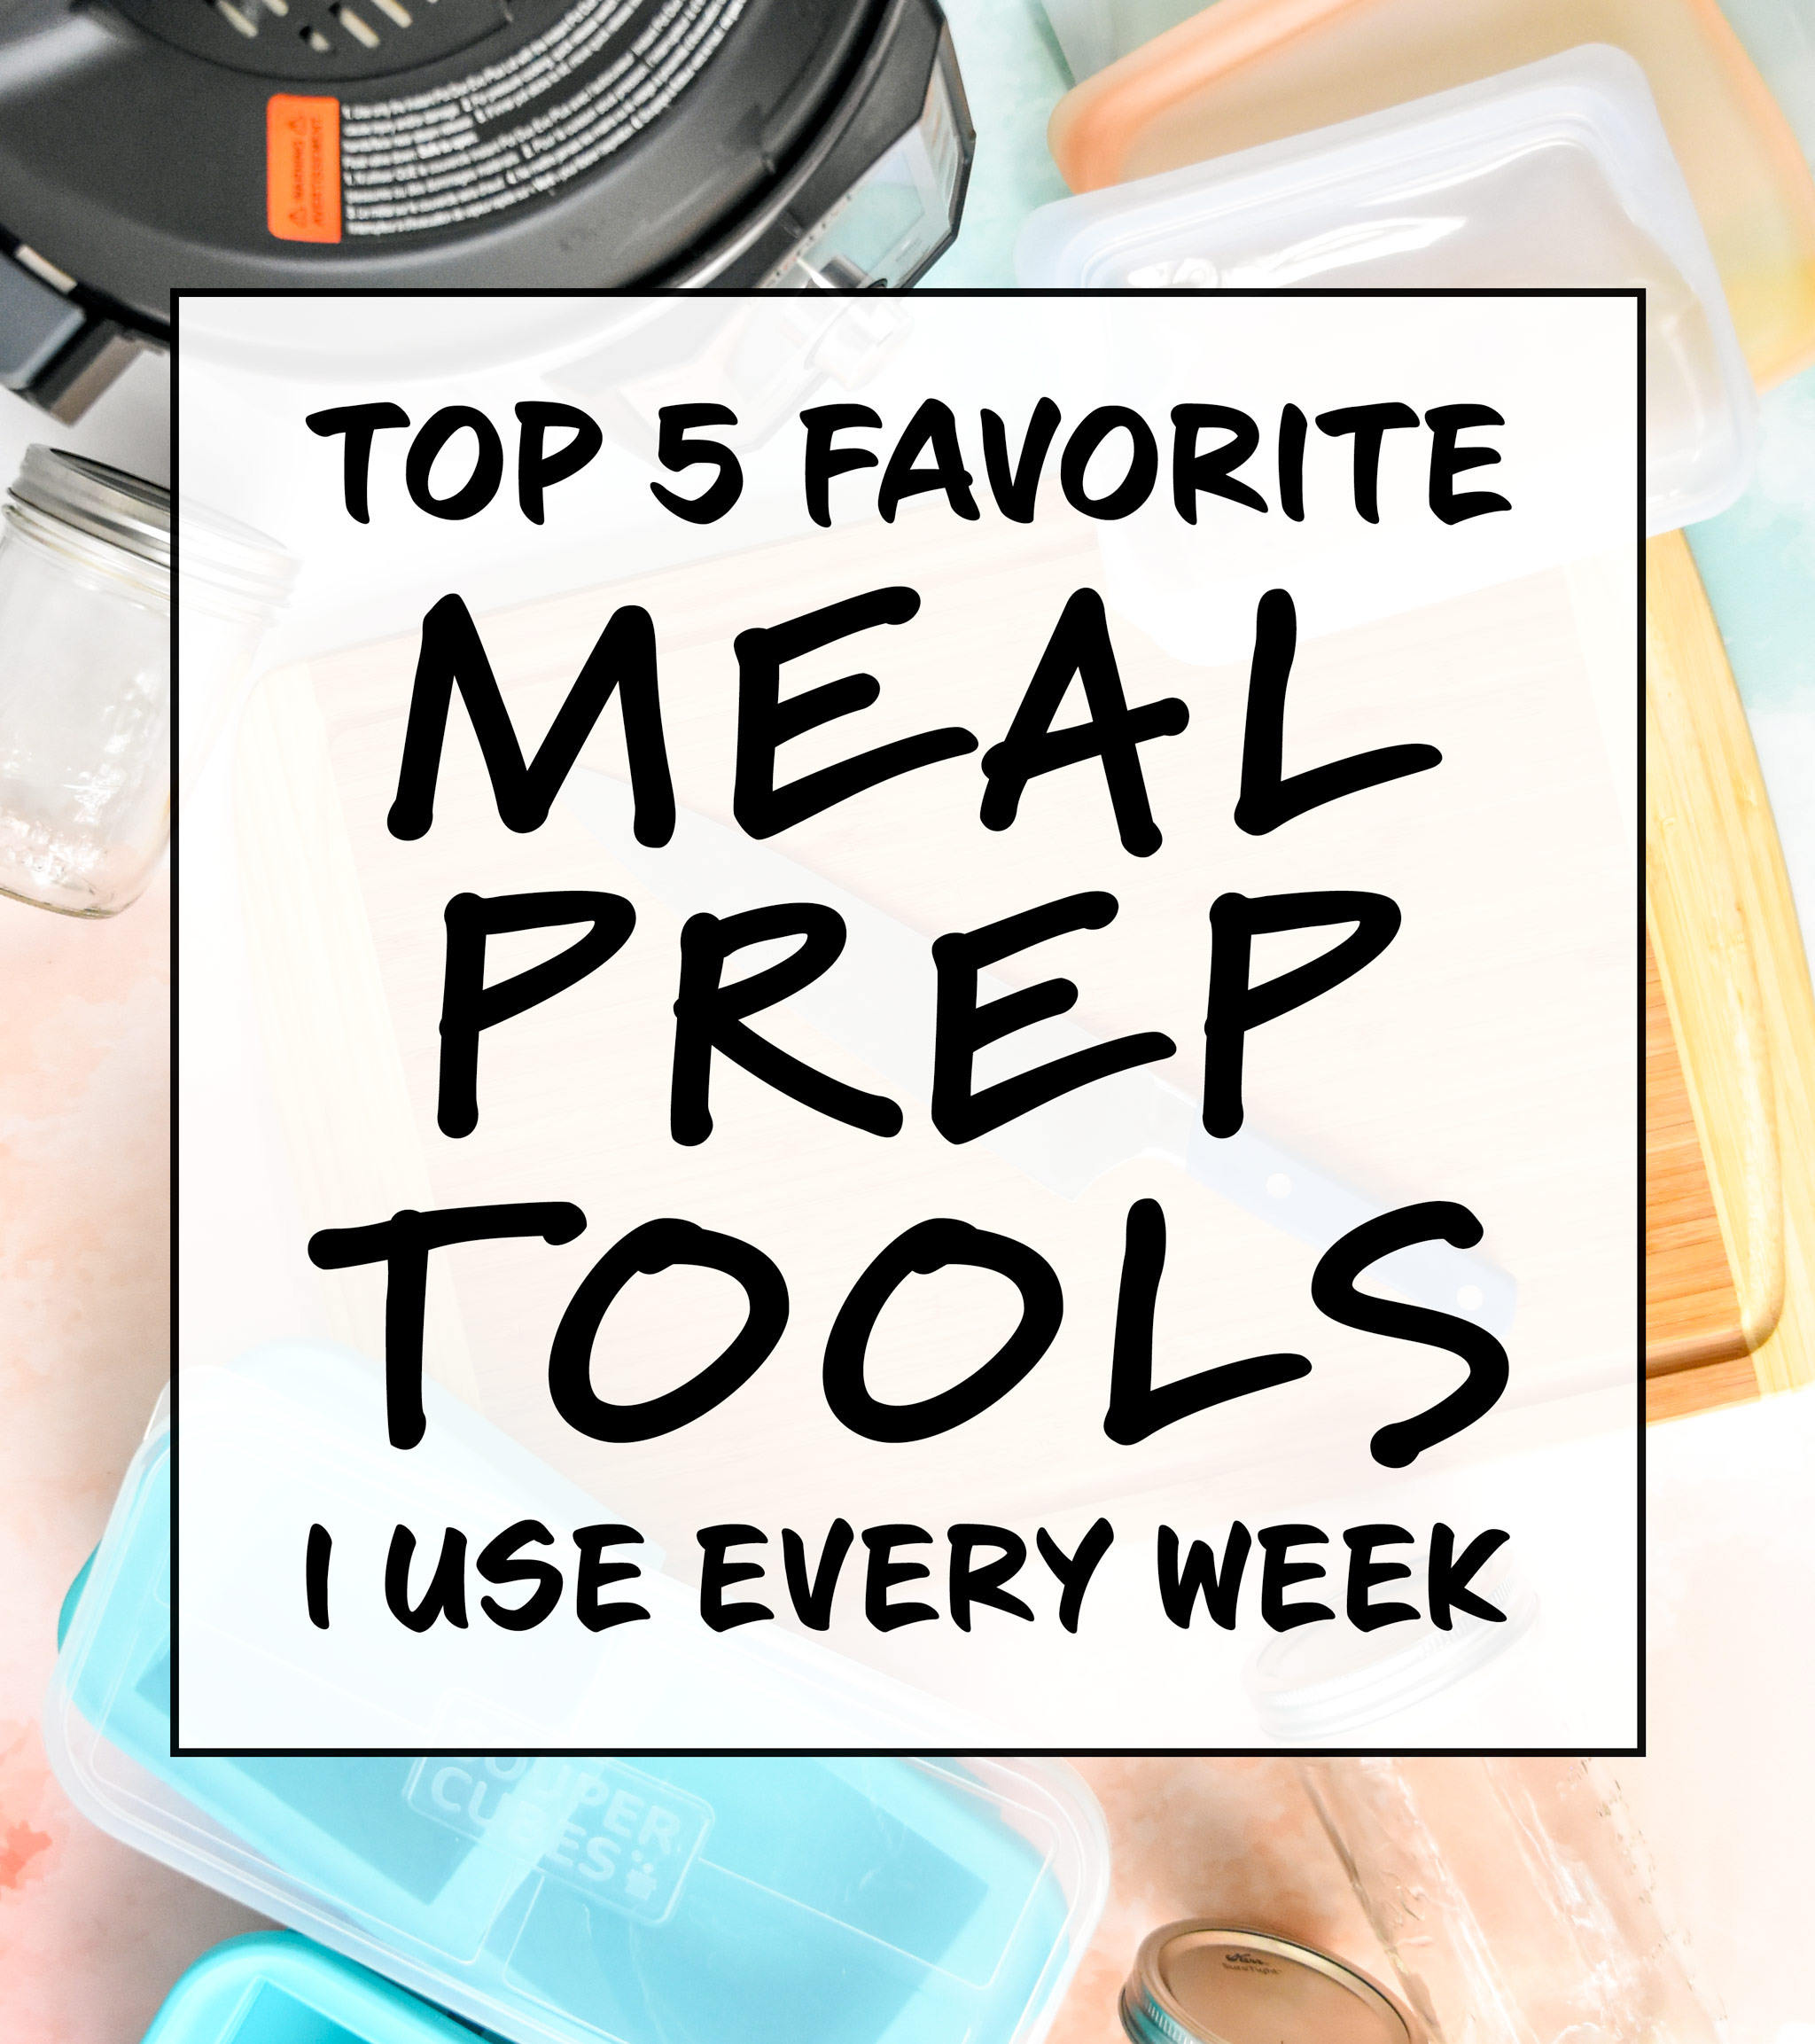 top 5 favorite meal prep tools text cover.